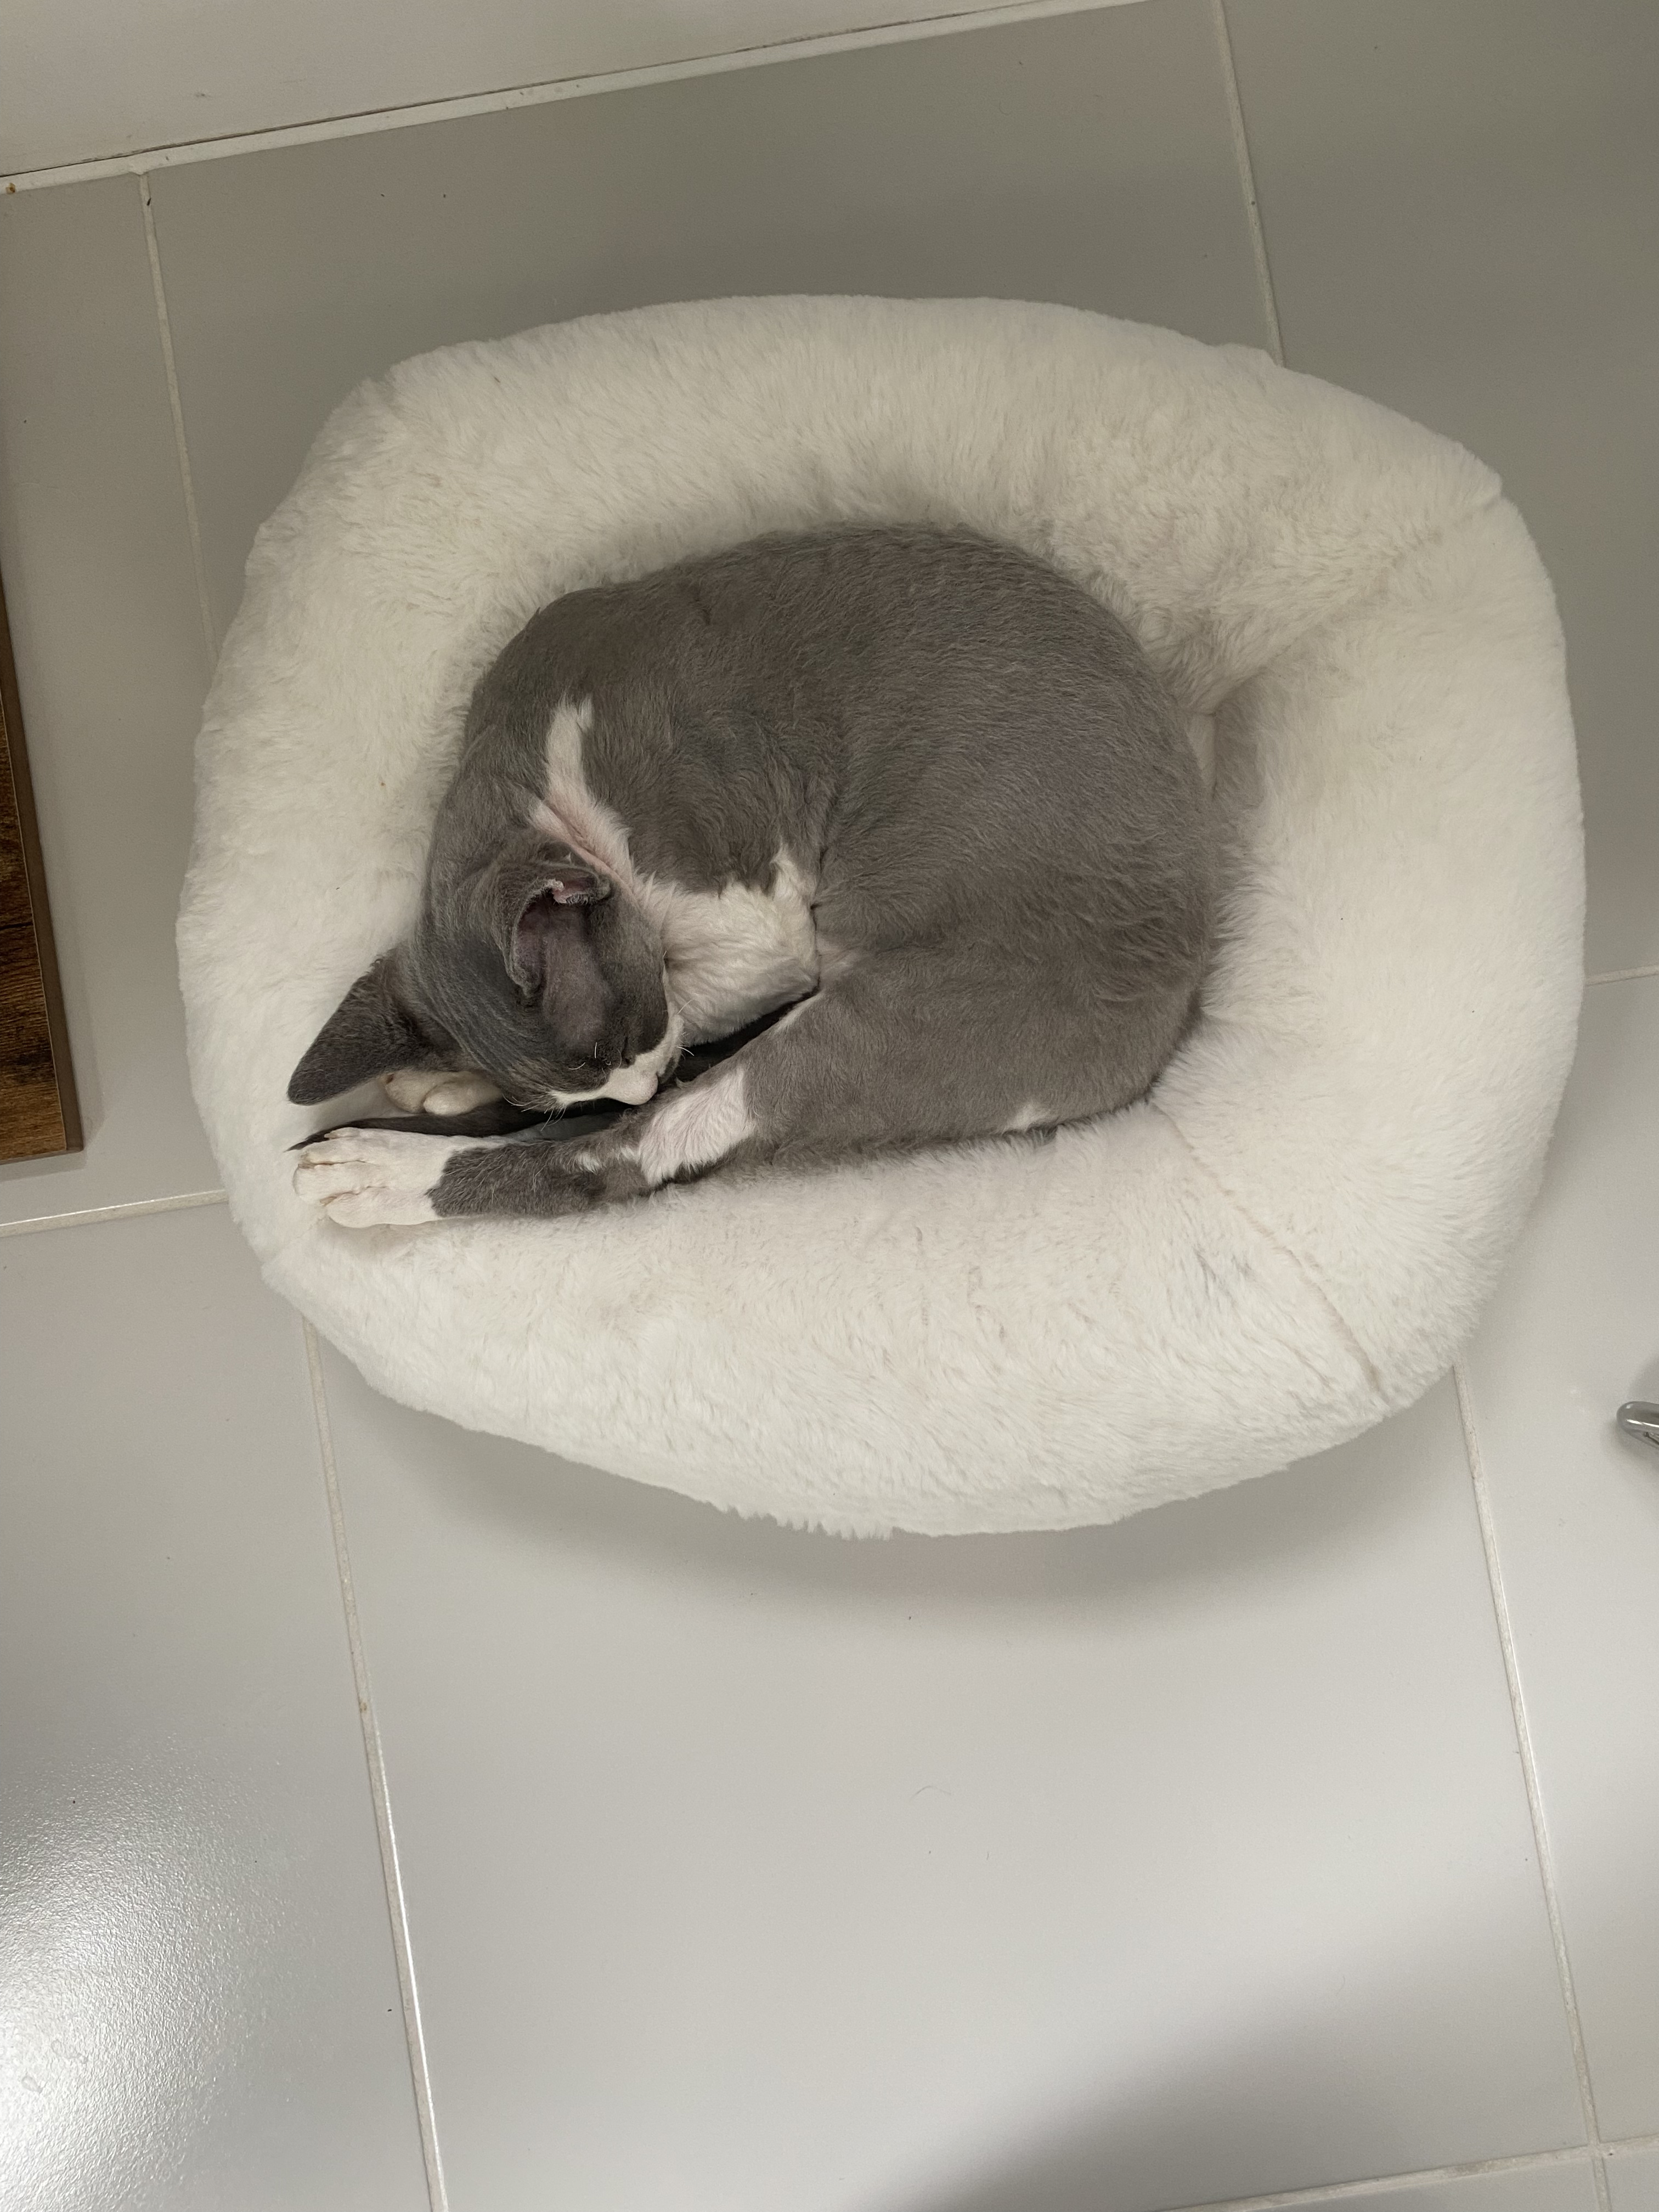 A grey cat sleeping peacefully in his white donut shaped bed